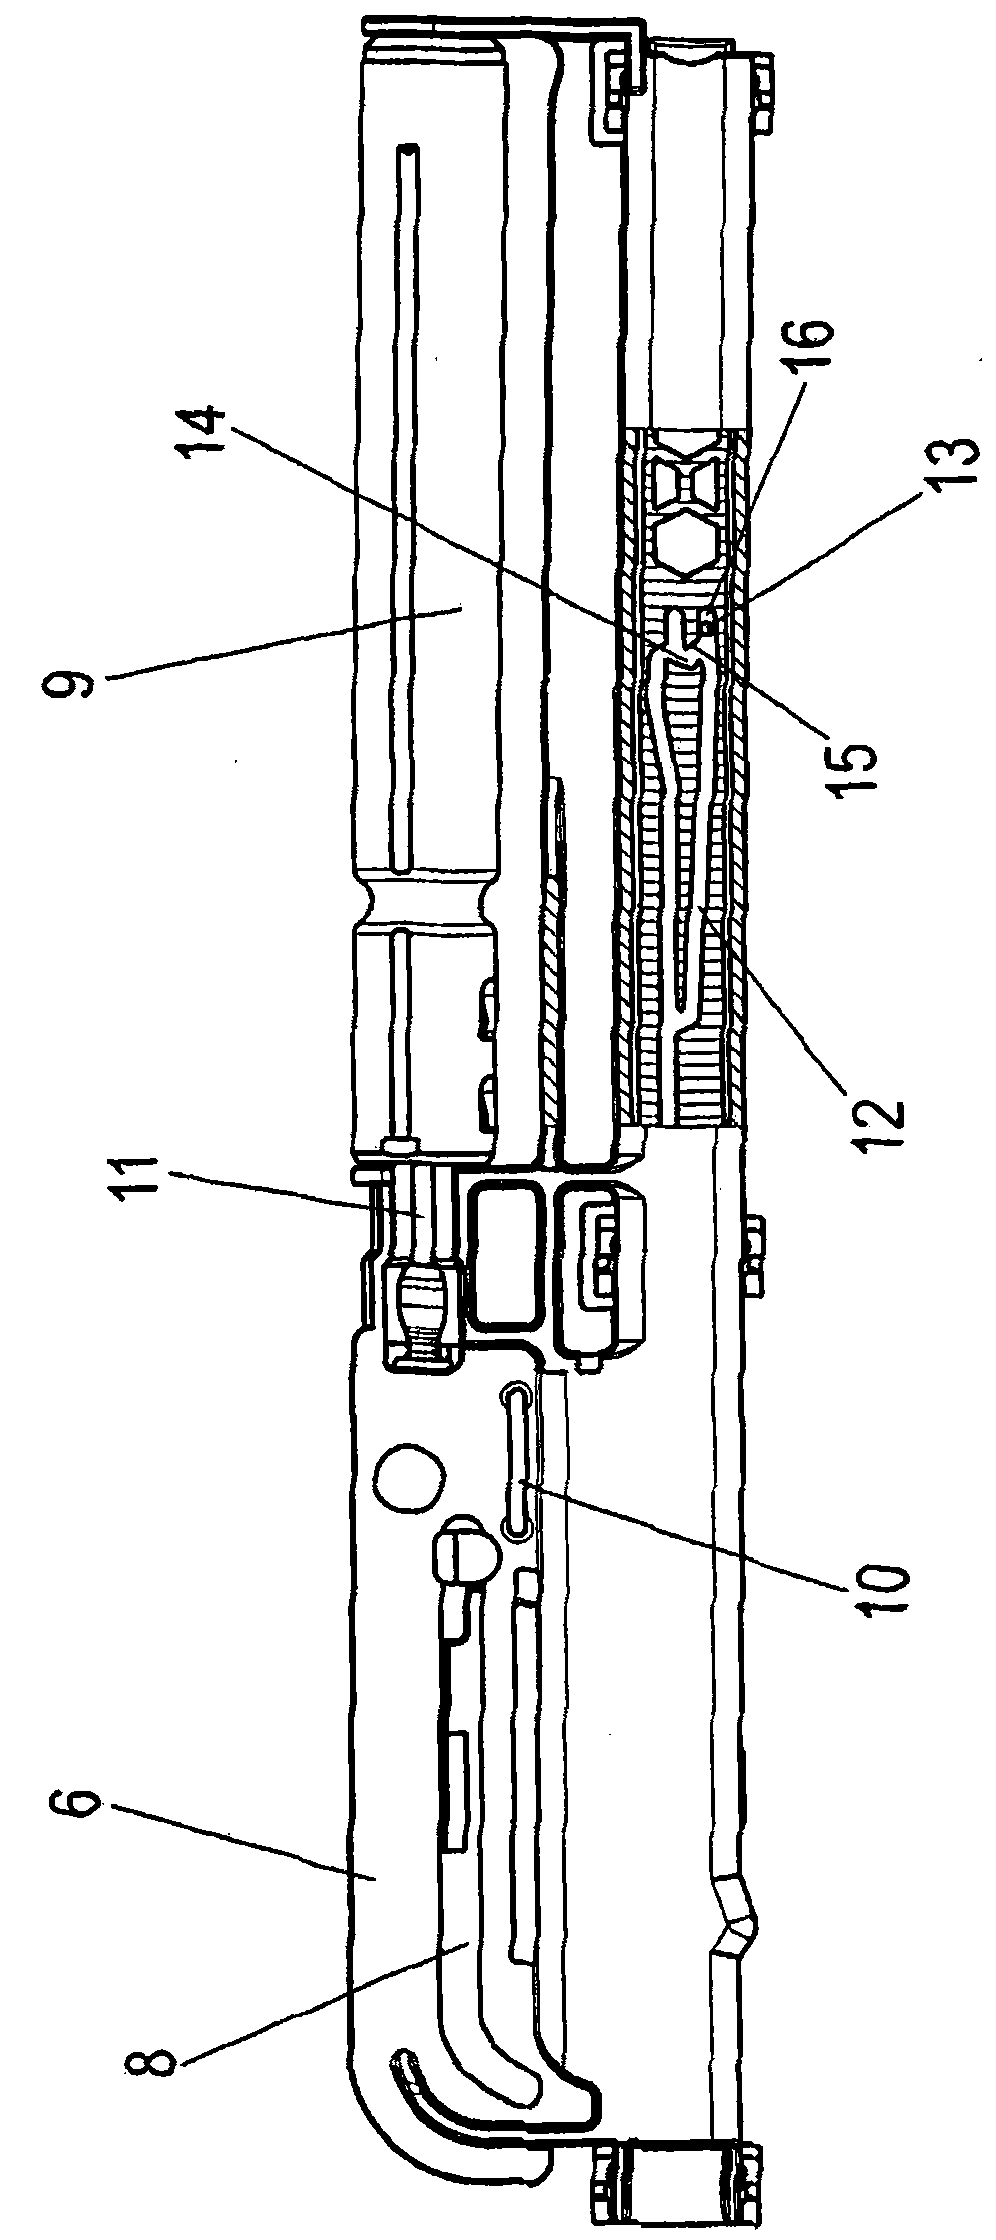 Device for opening and/or closing drawers and method for calibrating the same